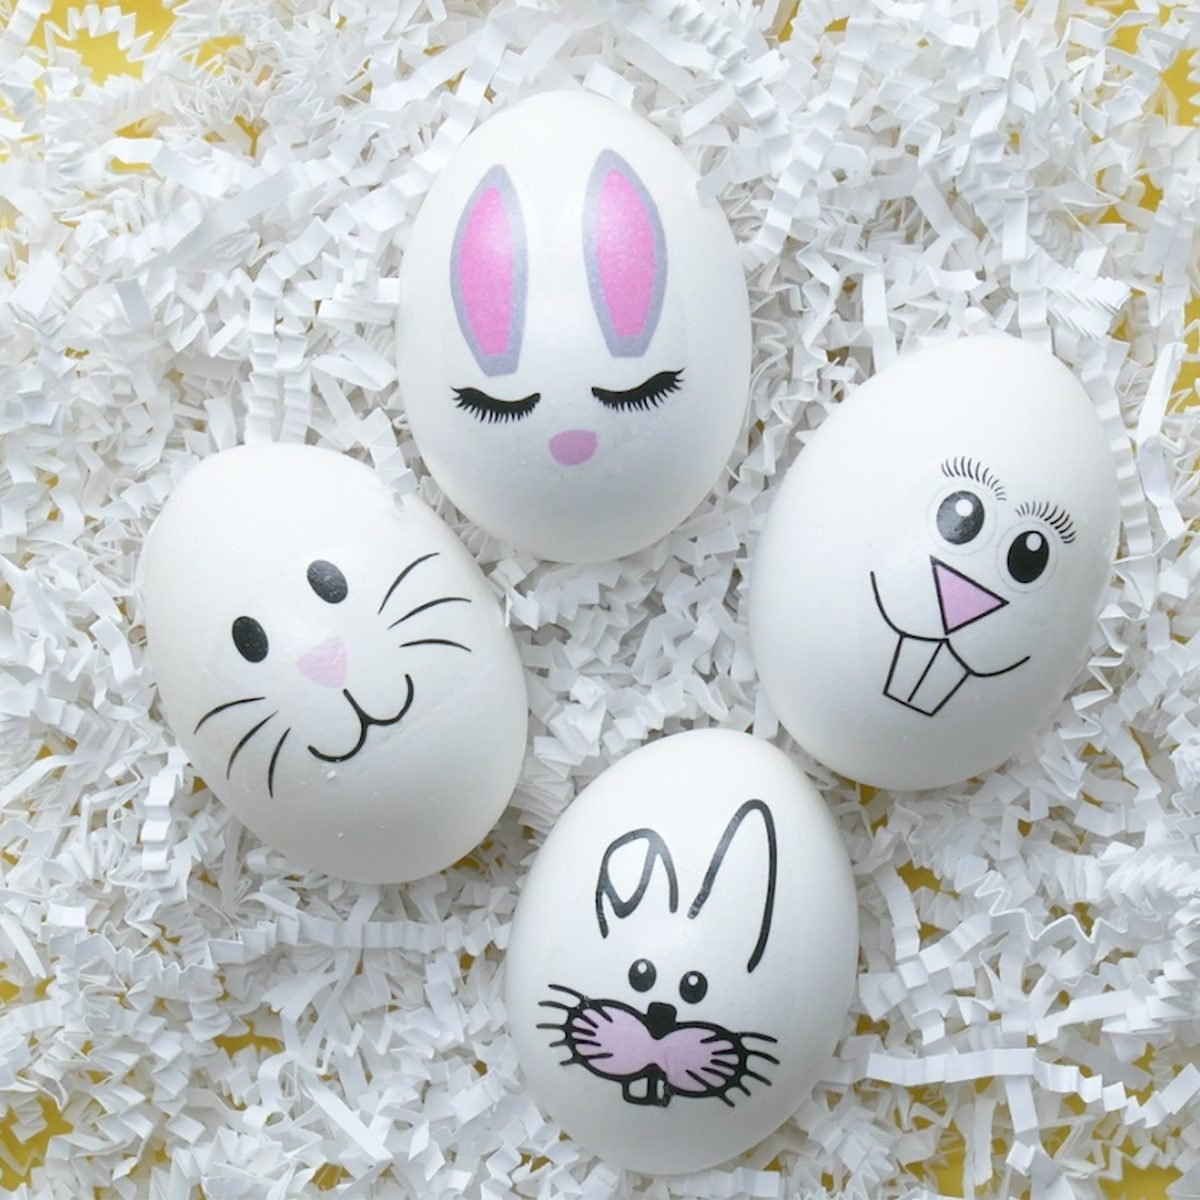 Easter Eggs Ideas
 15 Easter Egg Decorating Ideas You Need to Try